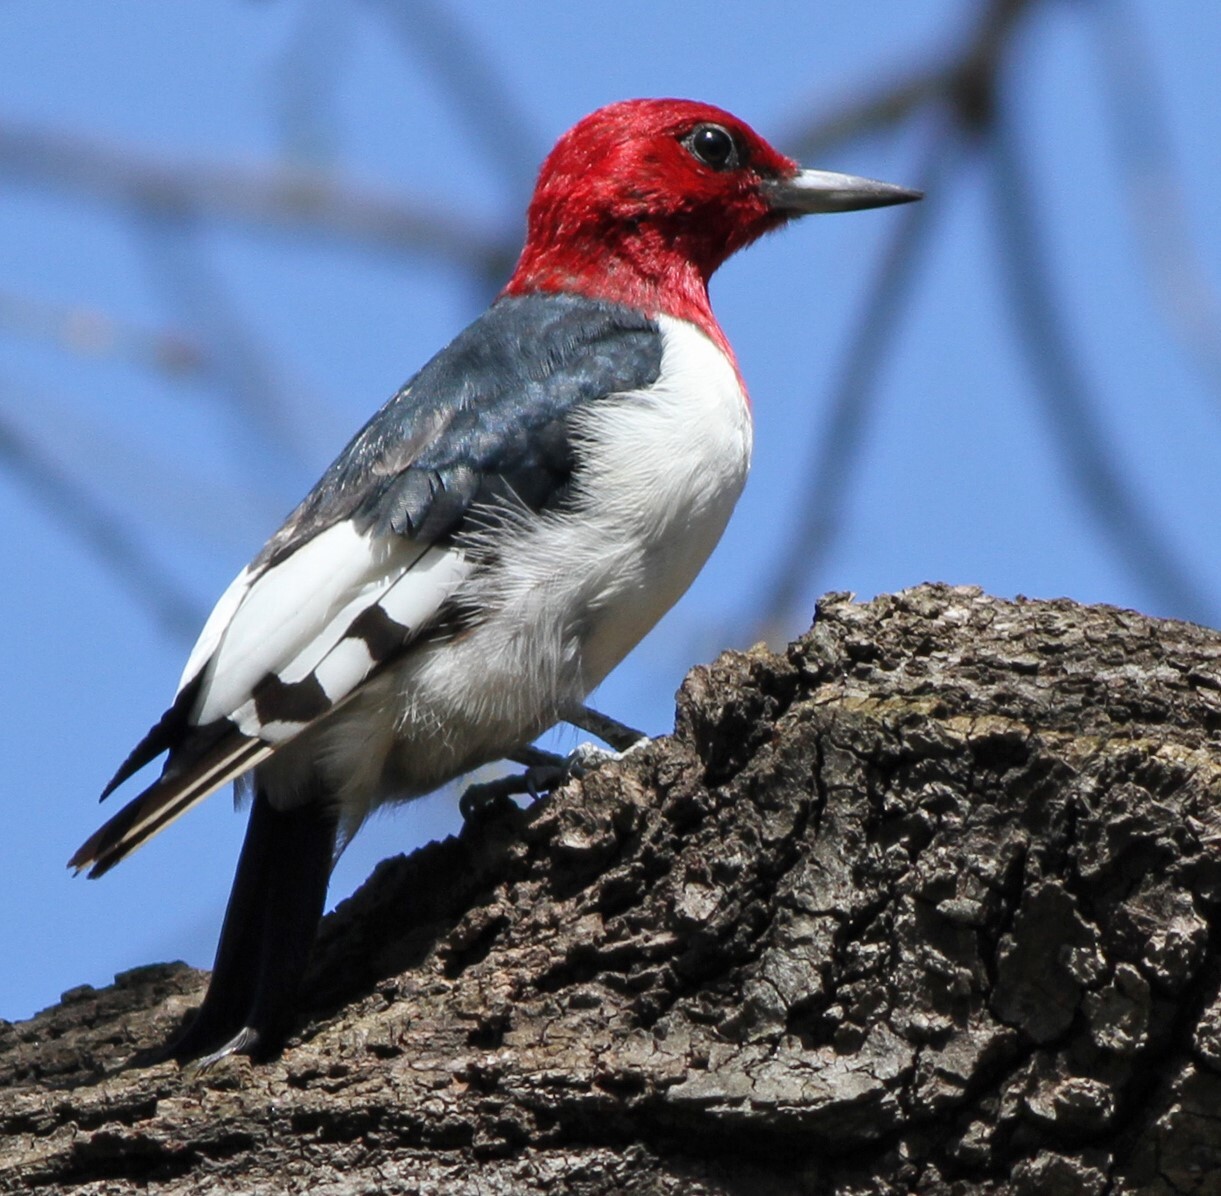 In recent years, a Red-headed Woodpecker has often spent the winter in Central Park. <a href="https://www.flickr.com/photos/billy3001/34053018085/" target="_blank">Photo</a>: Bill Benish/<a href="https://creativecommons.org/licenses/by-nc-nd/2.0/" target="_blank">CC BY-NC-ND 2.0</a>